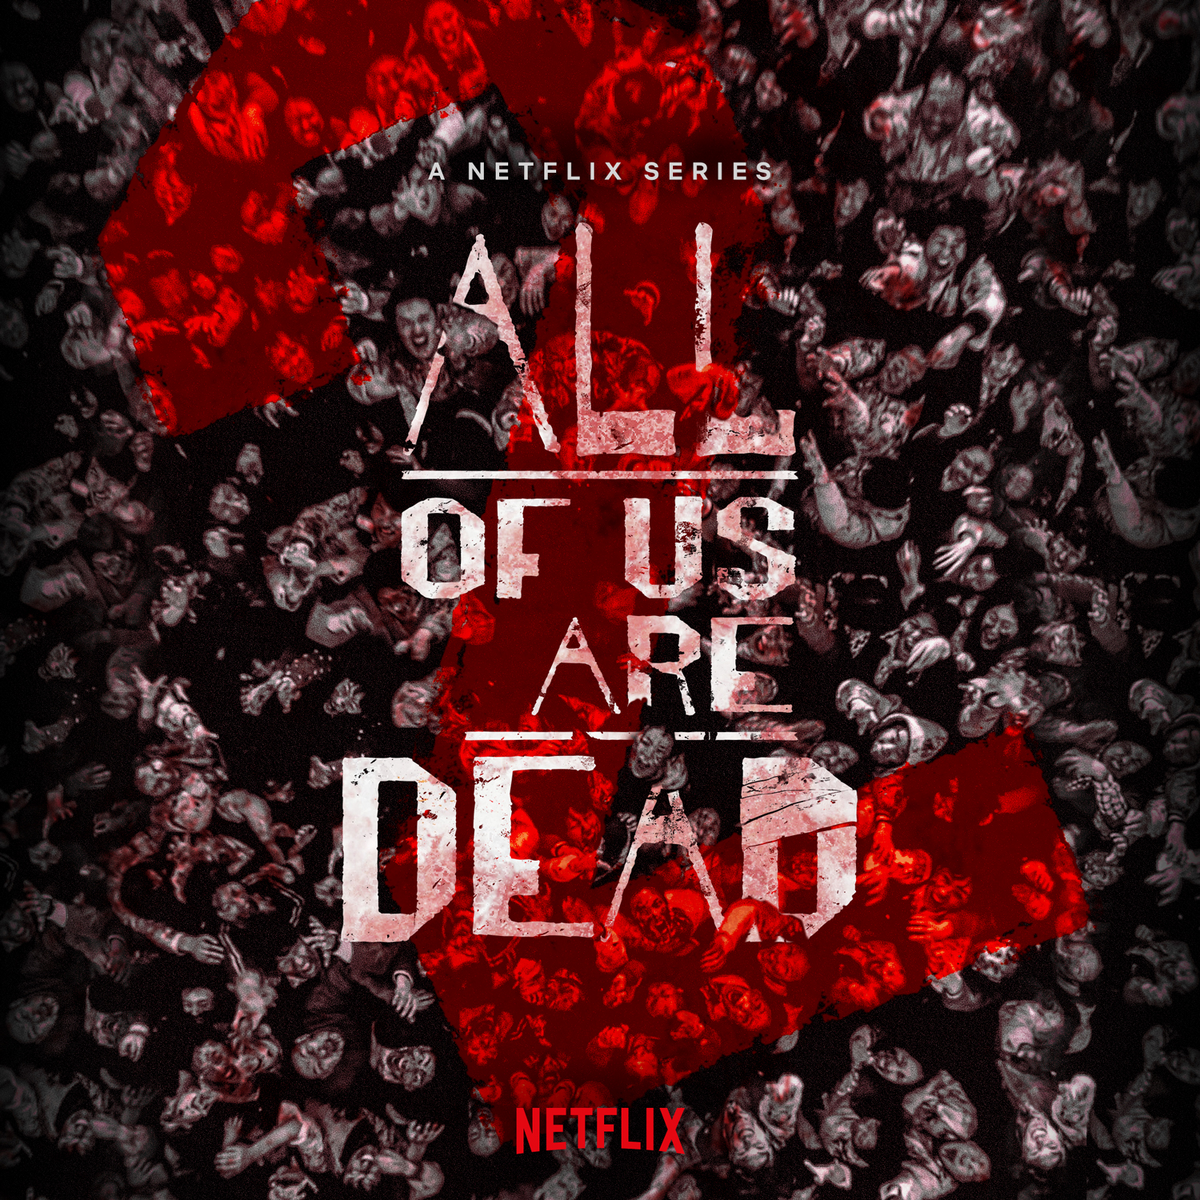 Will there be a season 2 of All of Us Are Dead?